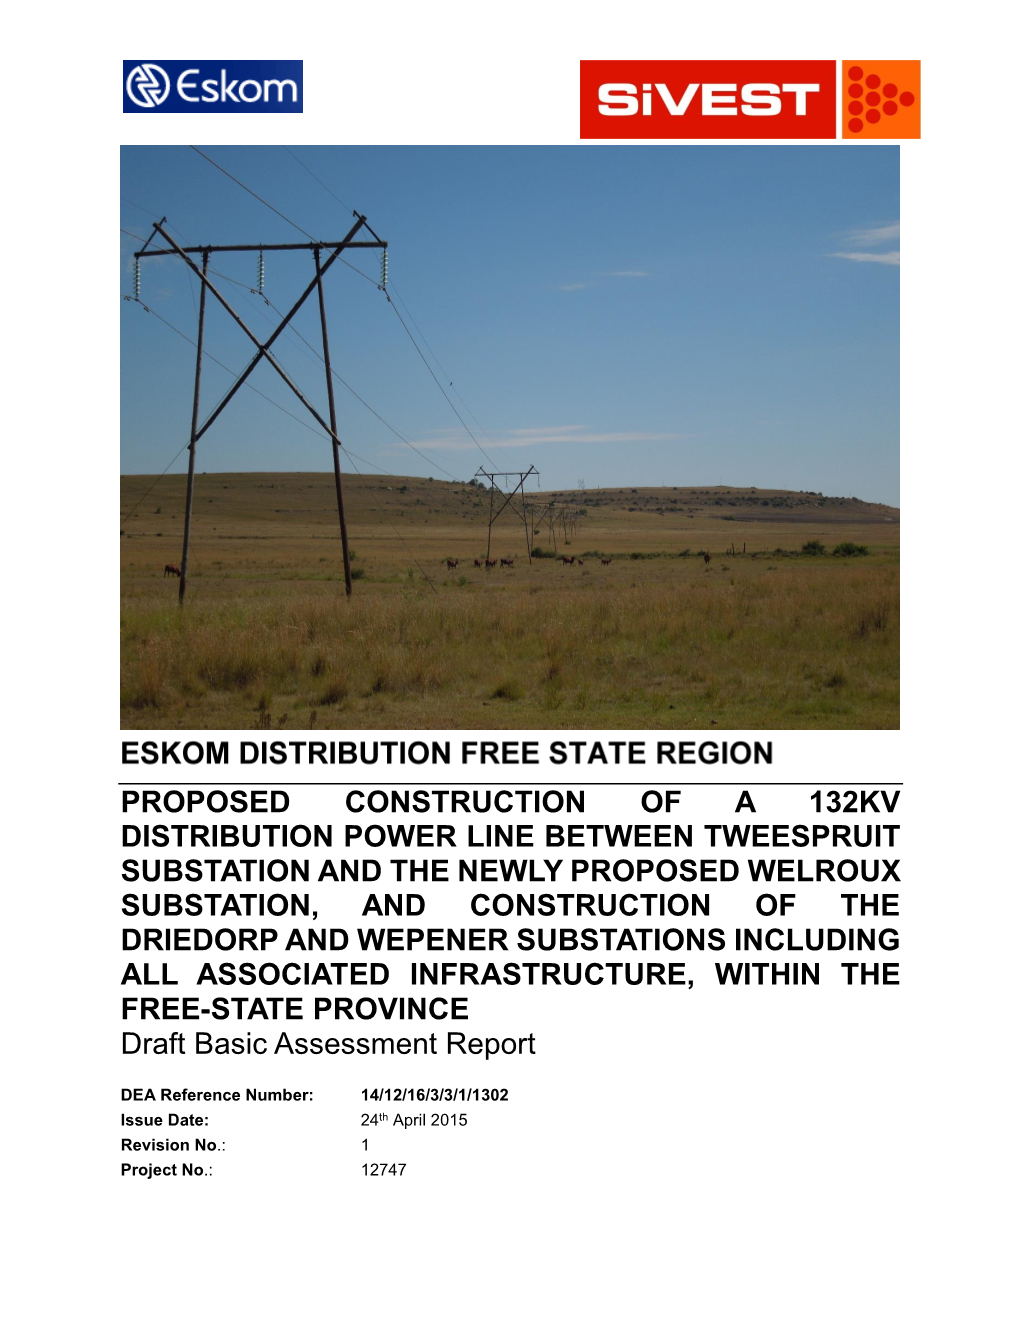 Proposed Construction of a 132Kv Distribution Power